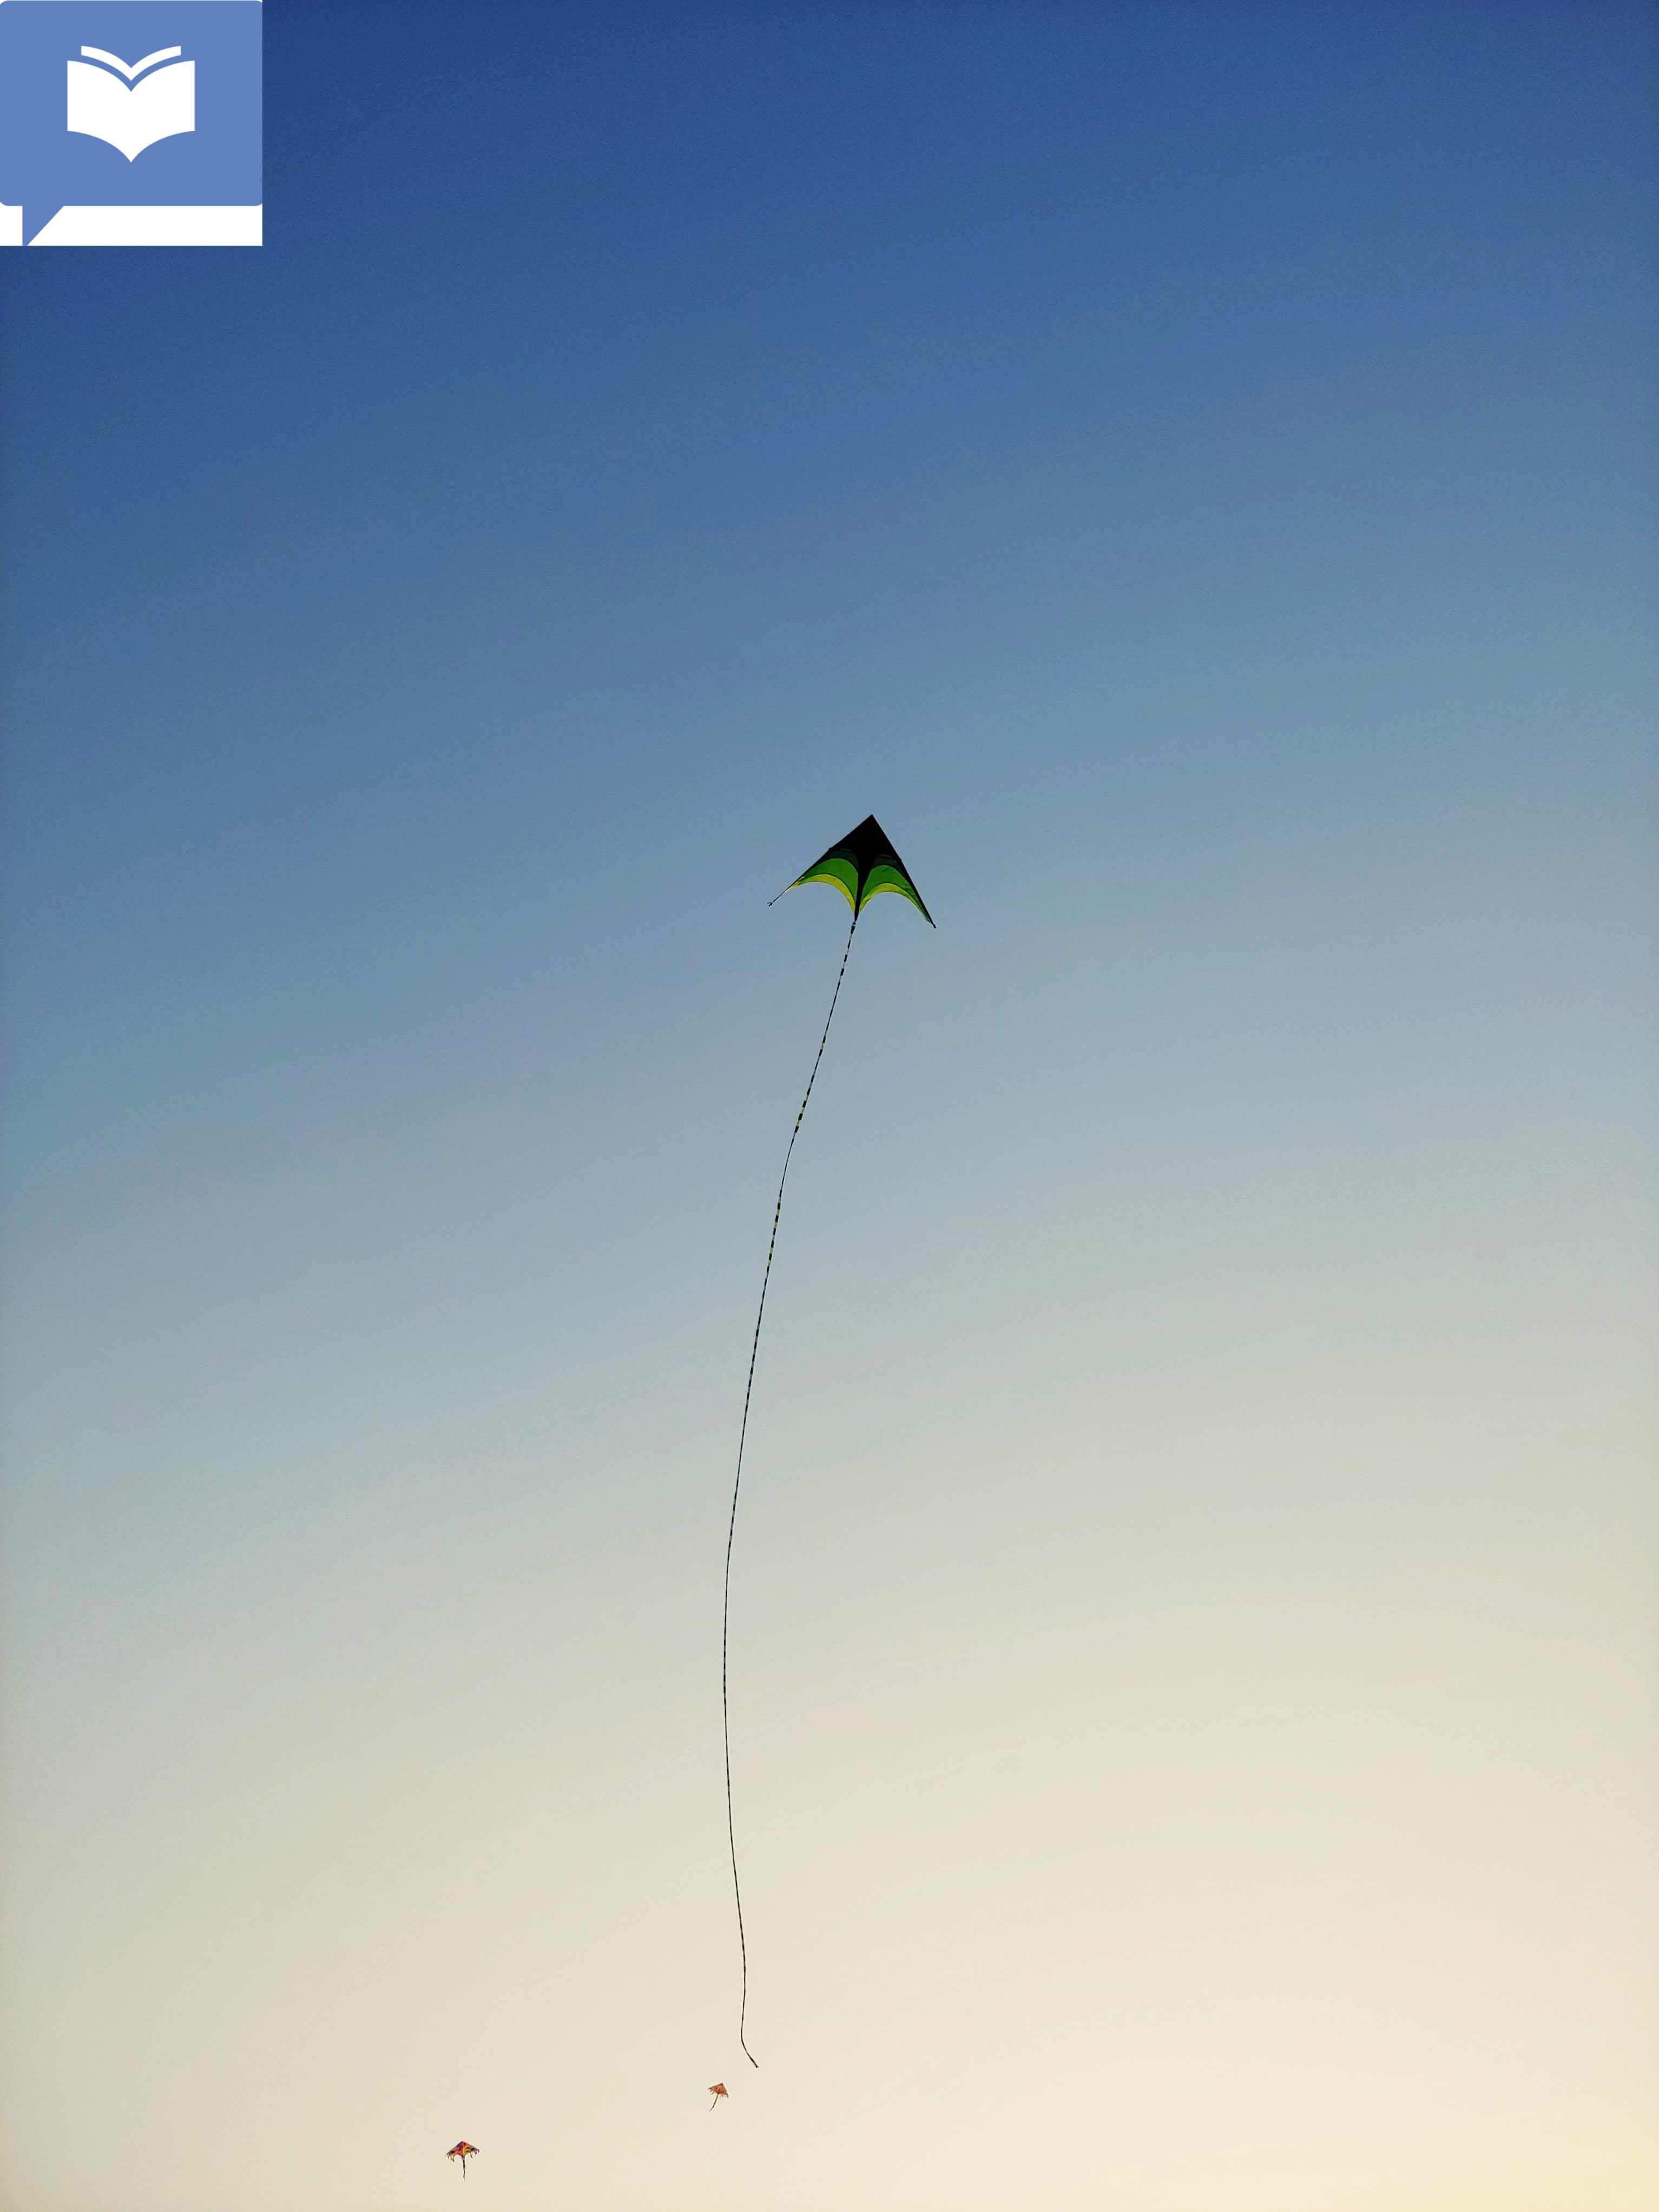 <p>Brenda flies a green kite every weekend morning. The Kite is ______.</p>